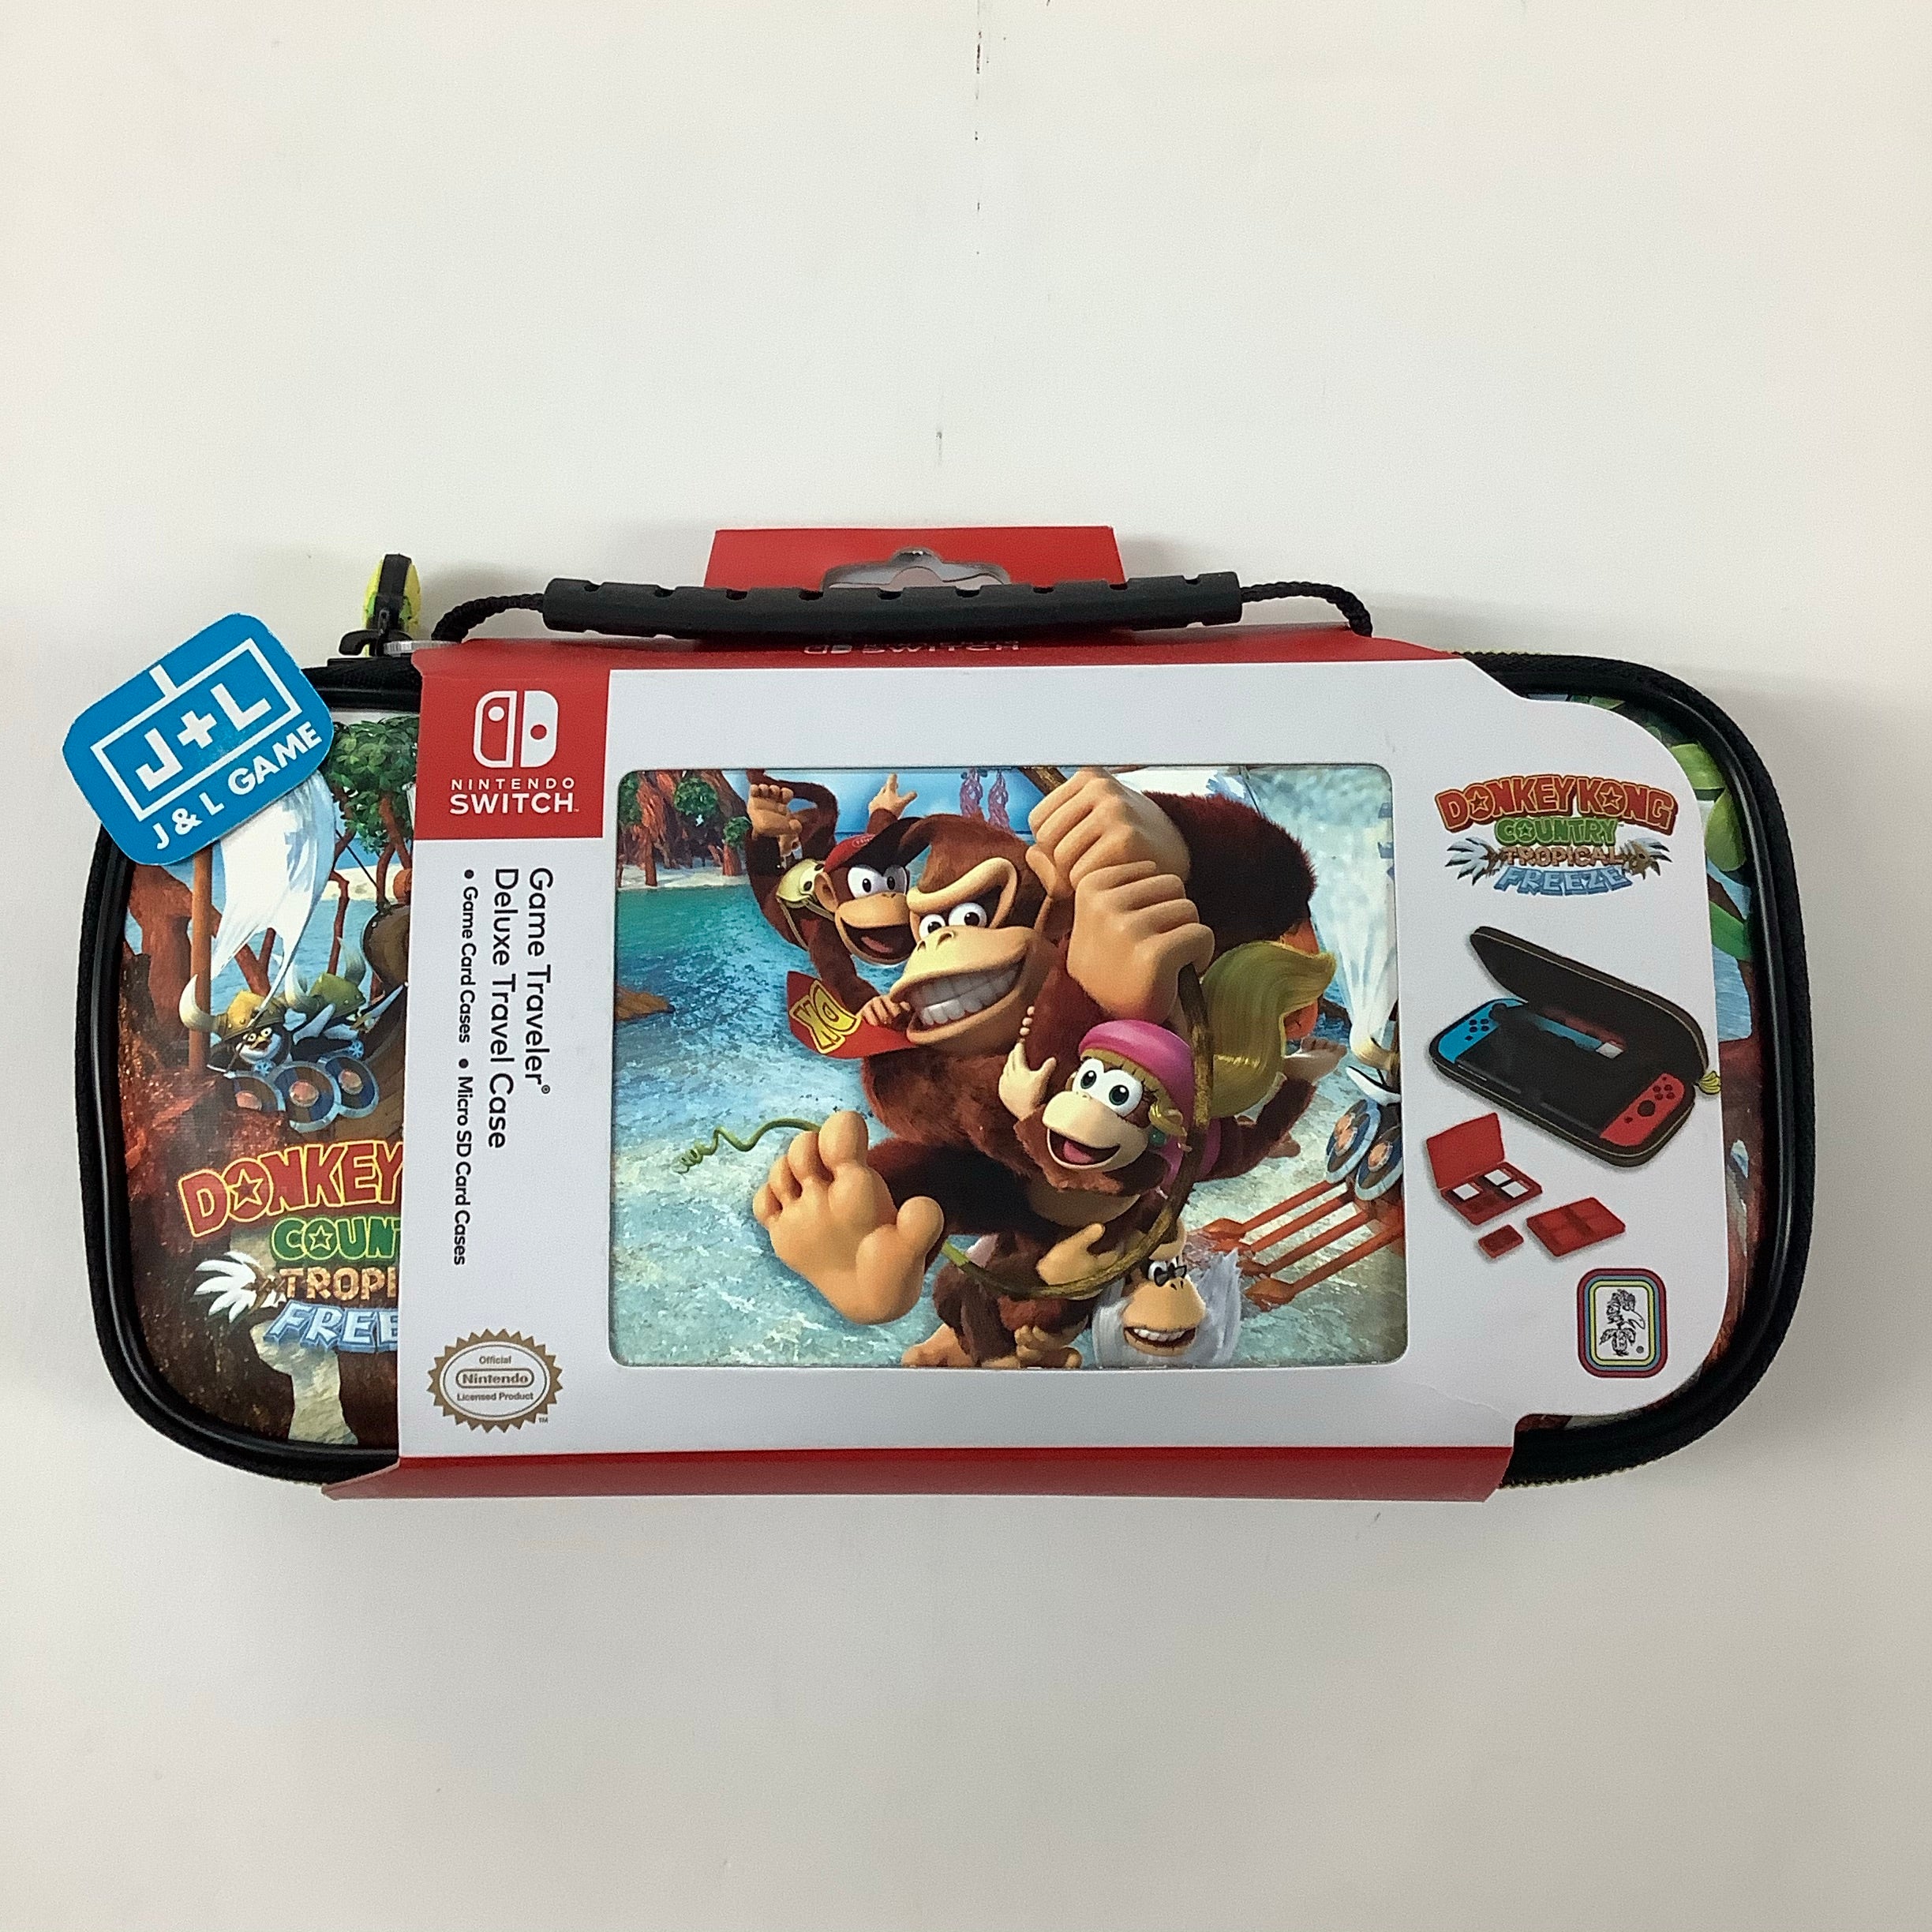 RDS Industries Deluxe Travel Case (Donkey Kong Country: Tropical Freeze) - (NSW) Nintendo Switch Accessories RDS Industries   